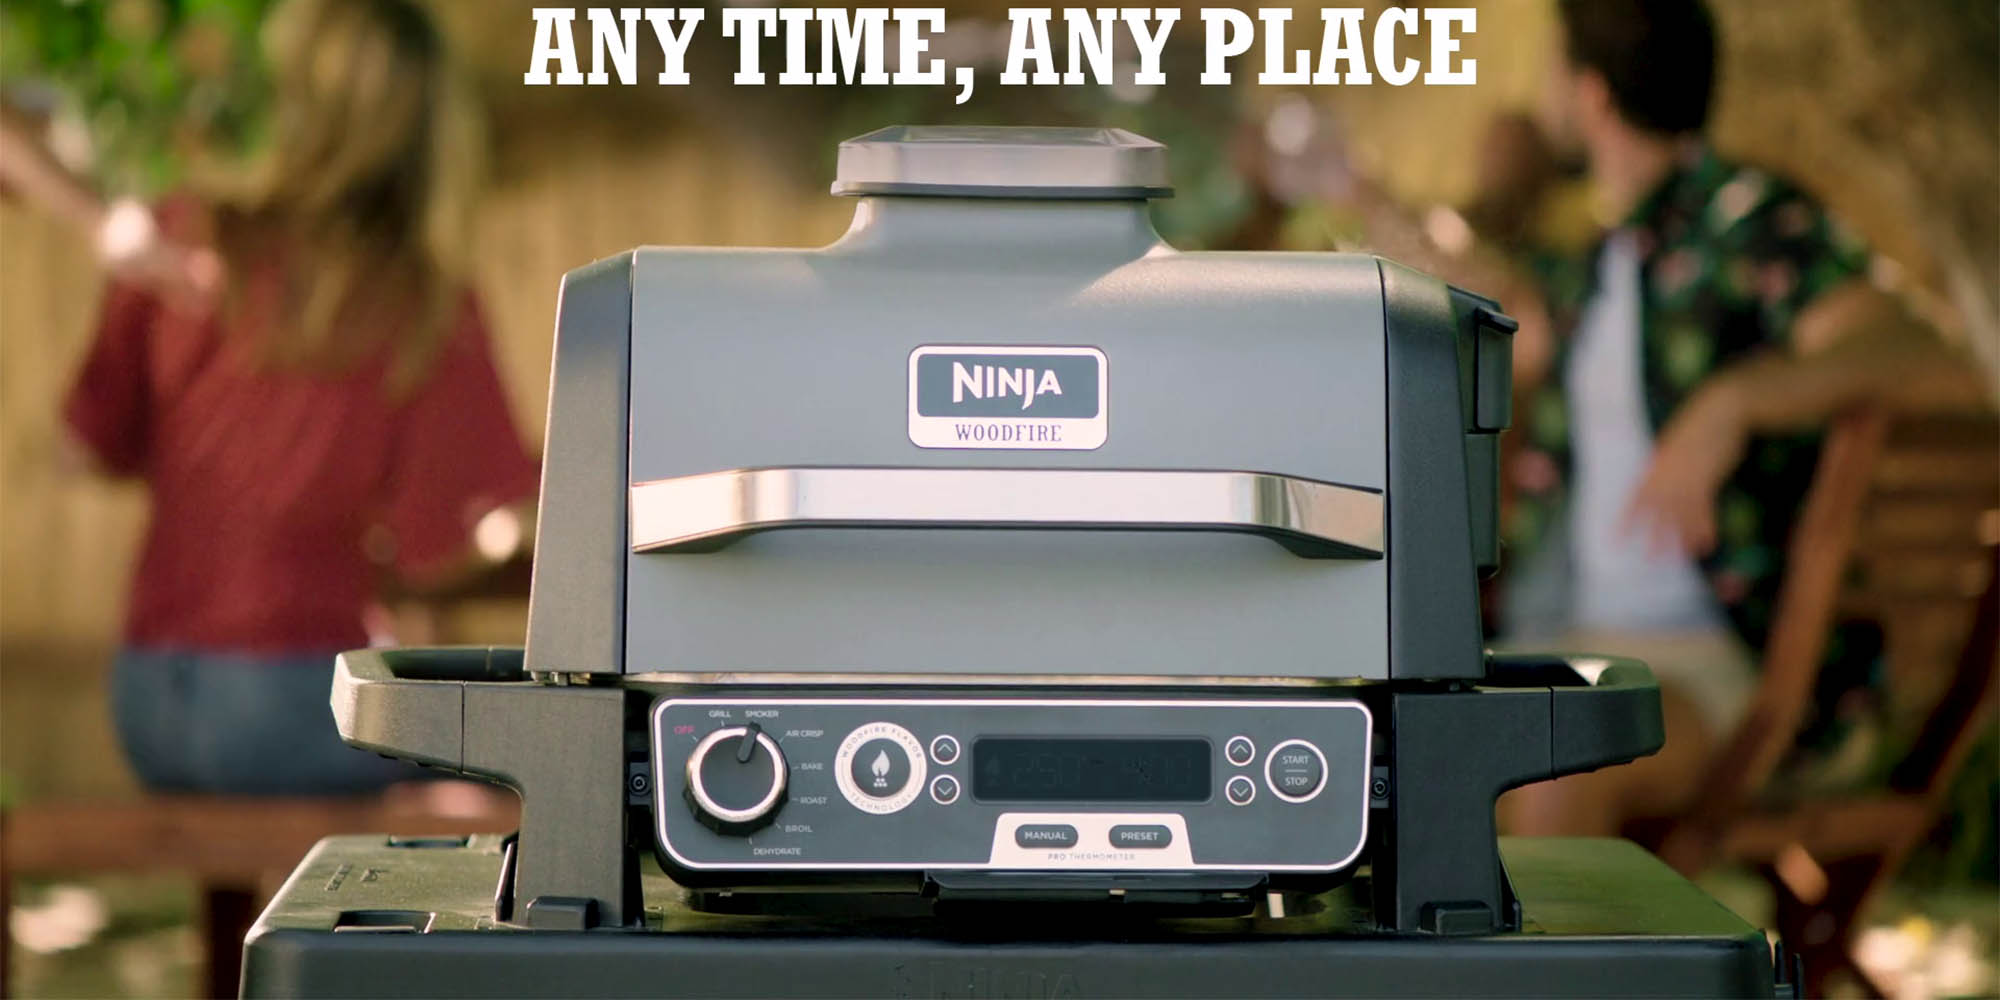 https://9to5toys.com/wp-content/uploads/sites/5/2022/09/Ninja-Woodfire-Outdoor-Grill-2.jpg